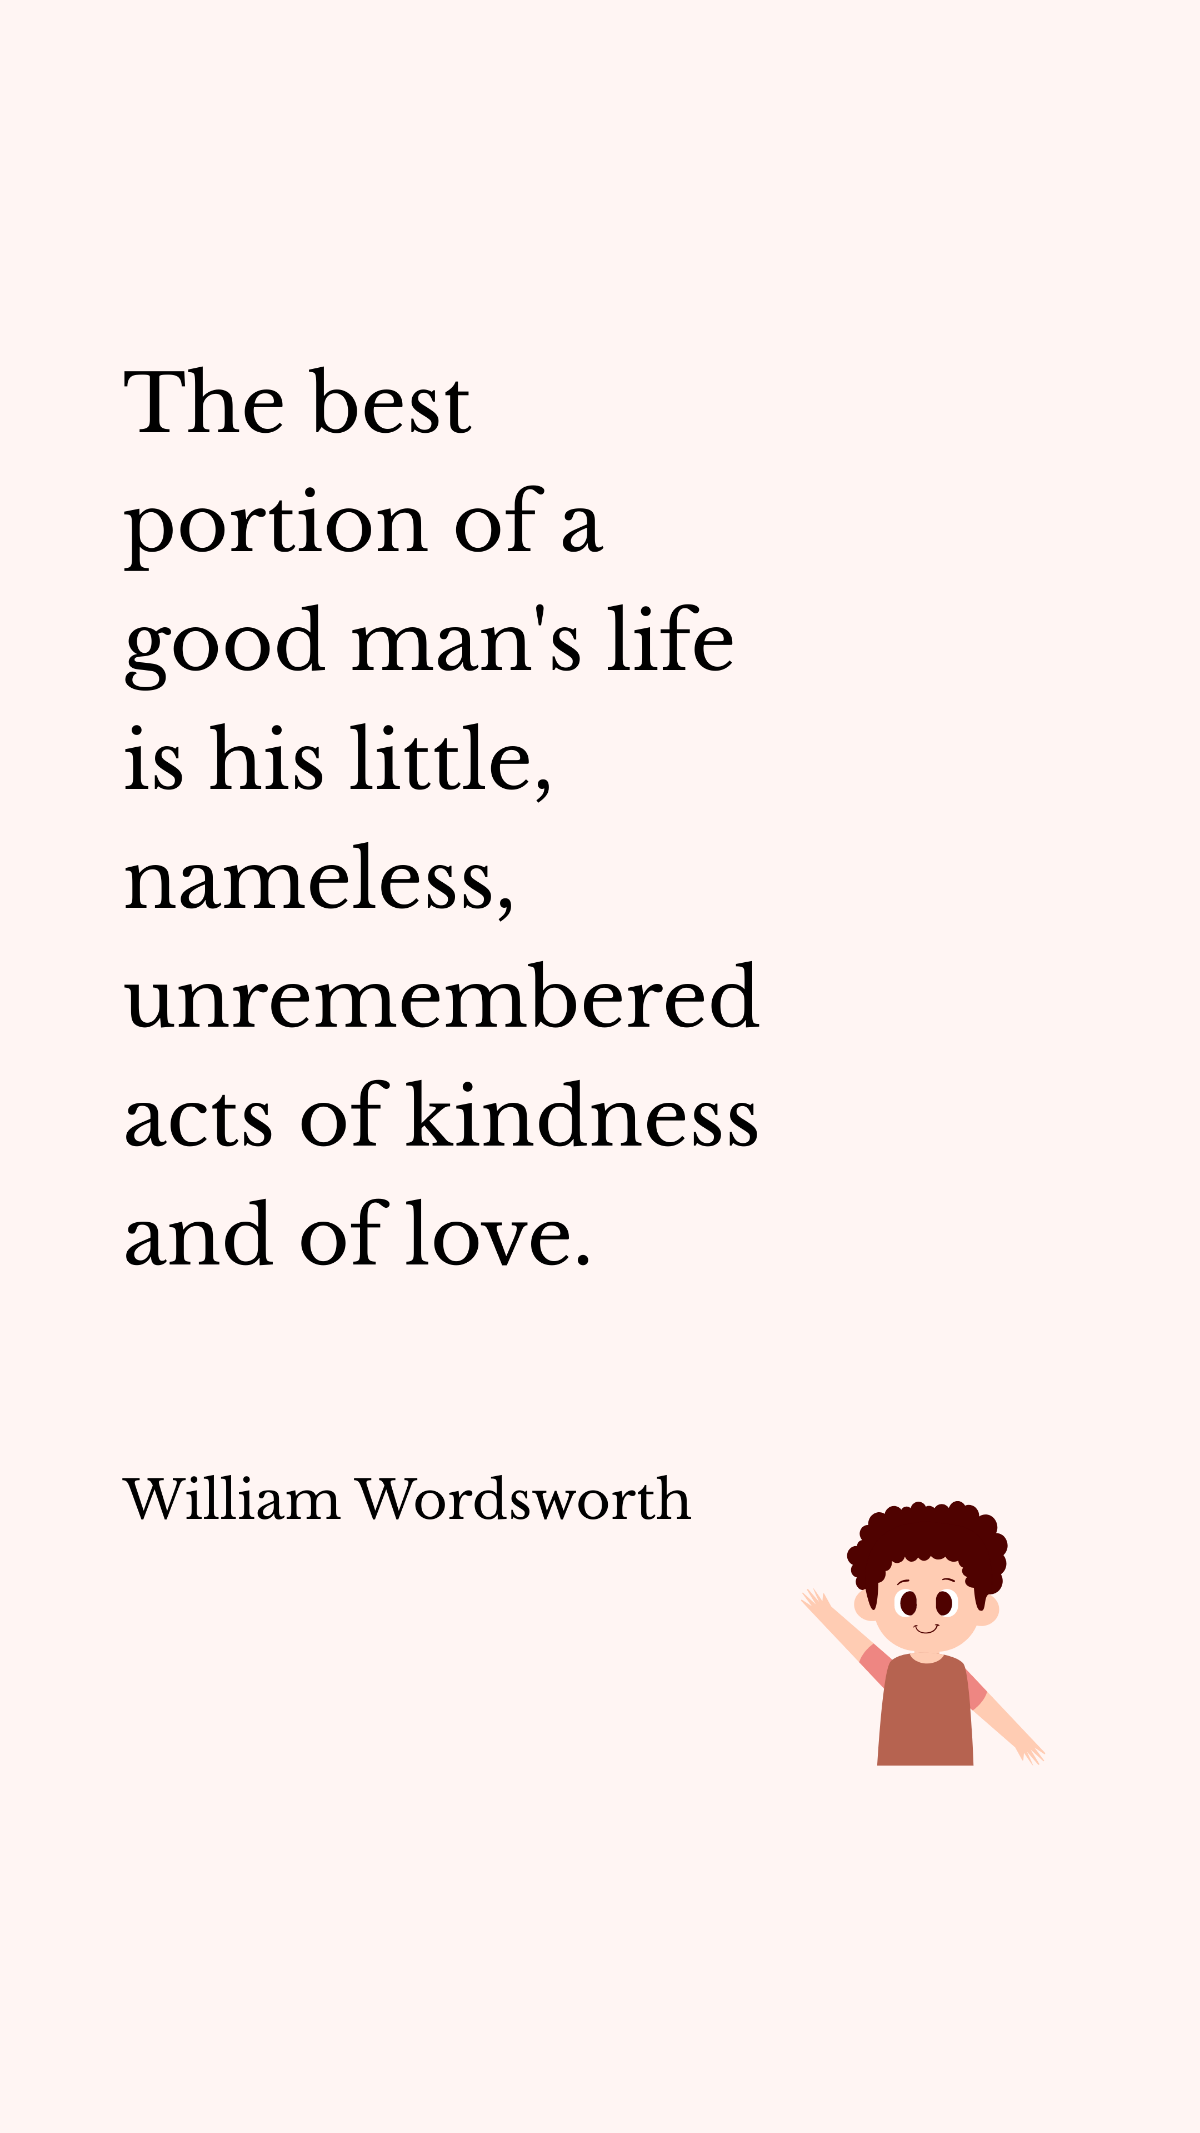 William Wordsworth - The best portion of a good man's life is his little, nameless, unremembered acts of kindness and of love.  Template